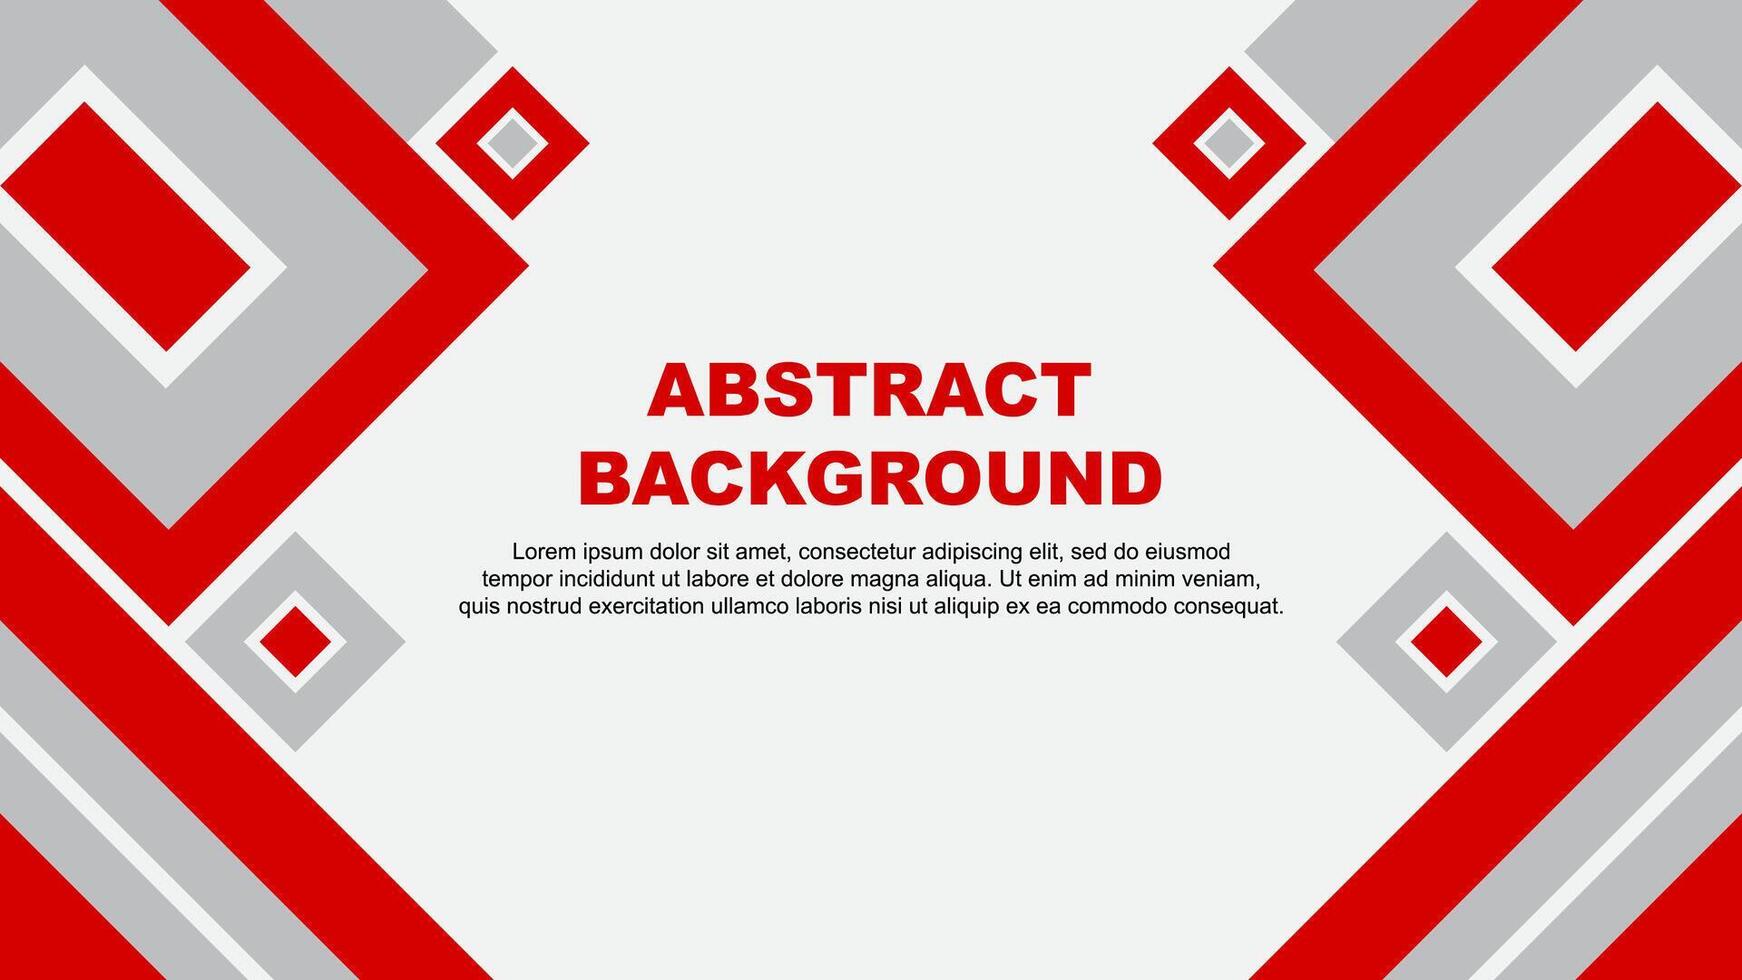 Abstract Background Design Template. Banner Wallpaper Vector Illustration. Red Cartoon